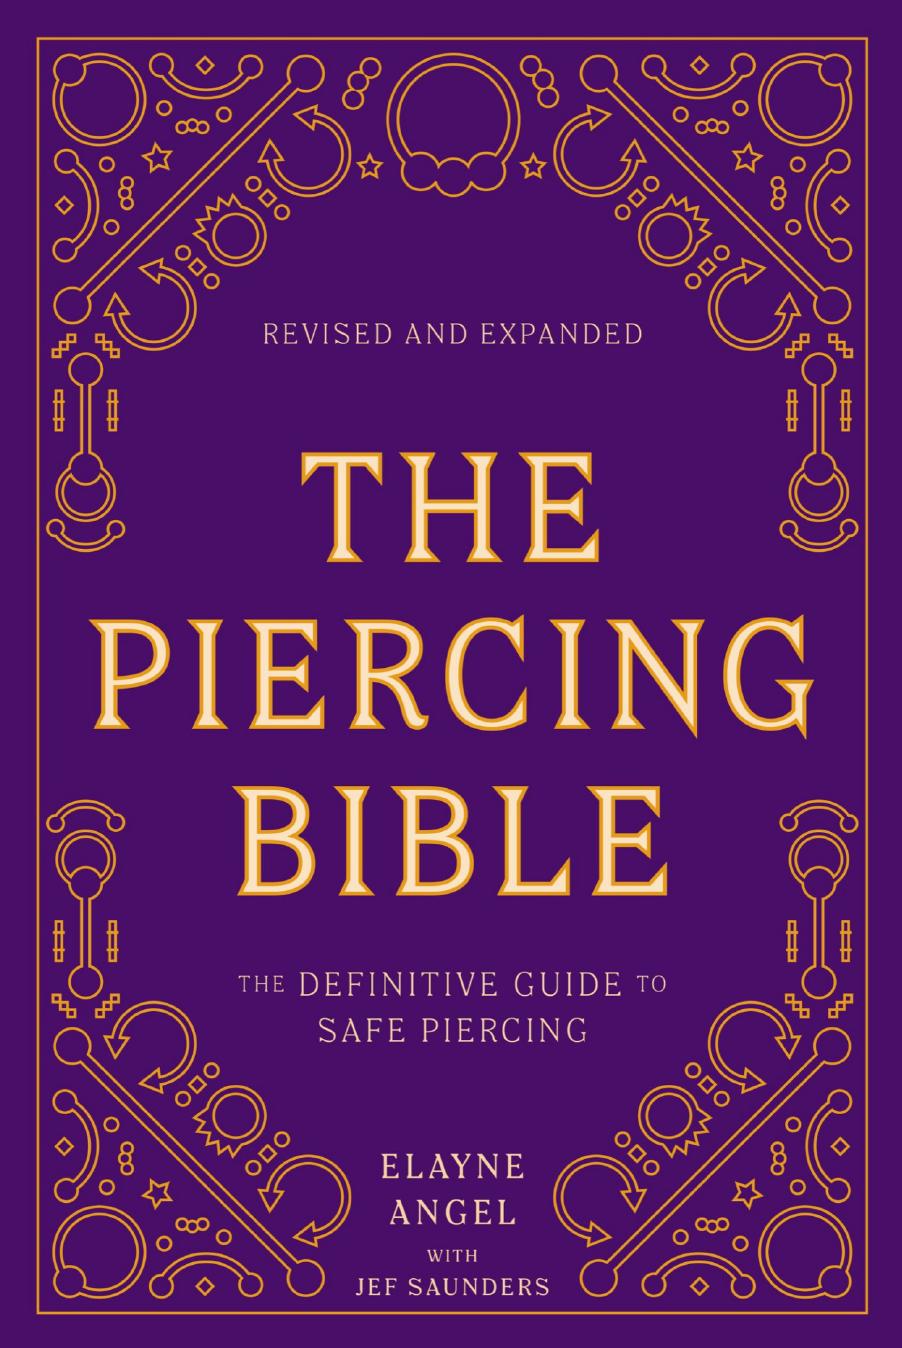 The Piercing Bible, Revised and Expanded by Elayne Angel